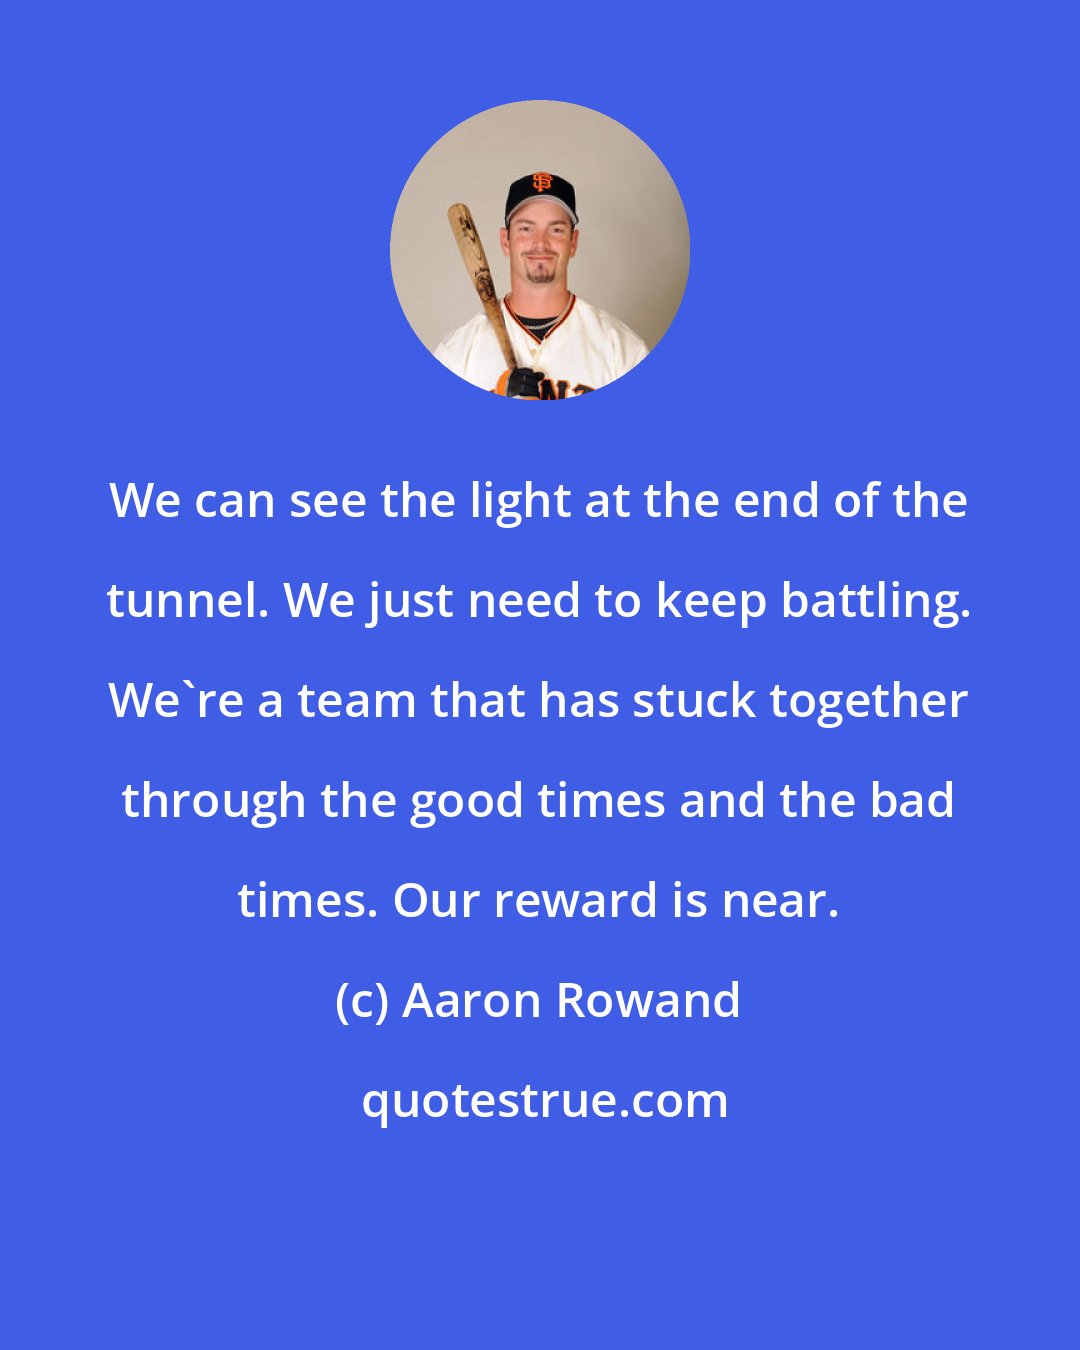 Aaron Rowand: We can see the light at the end of the tunnel. We just need to keep battling. We're a team that has stuck together through the good times and the bad times. Our reward is near.